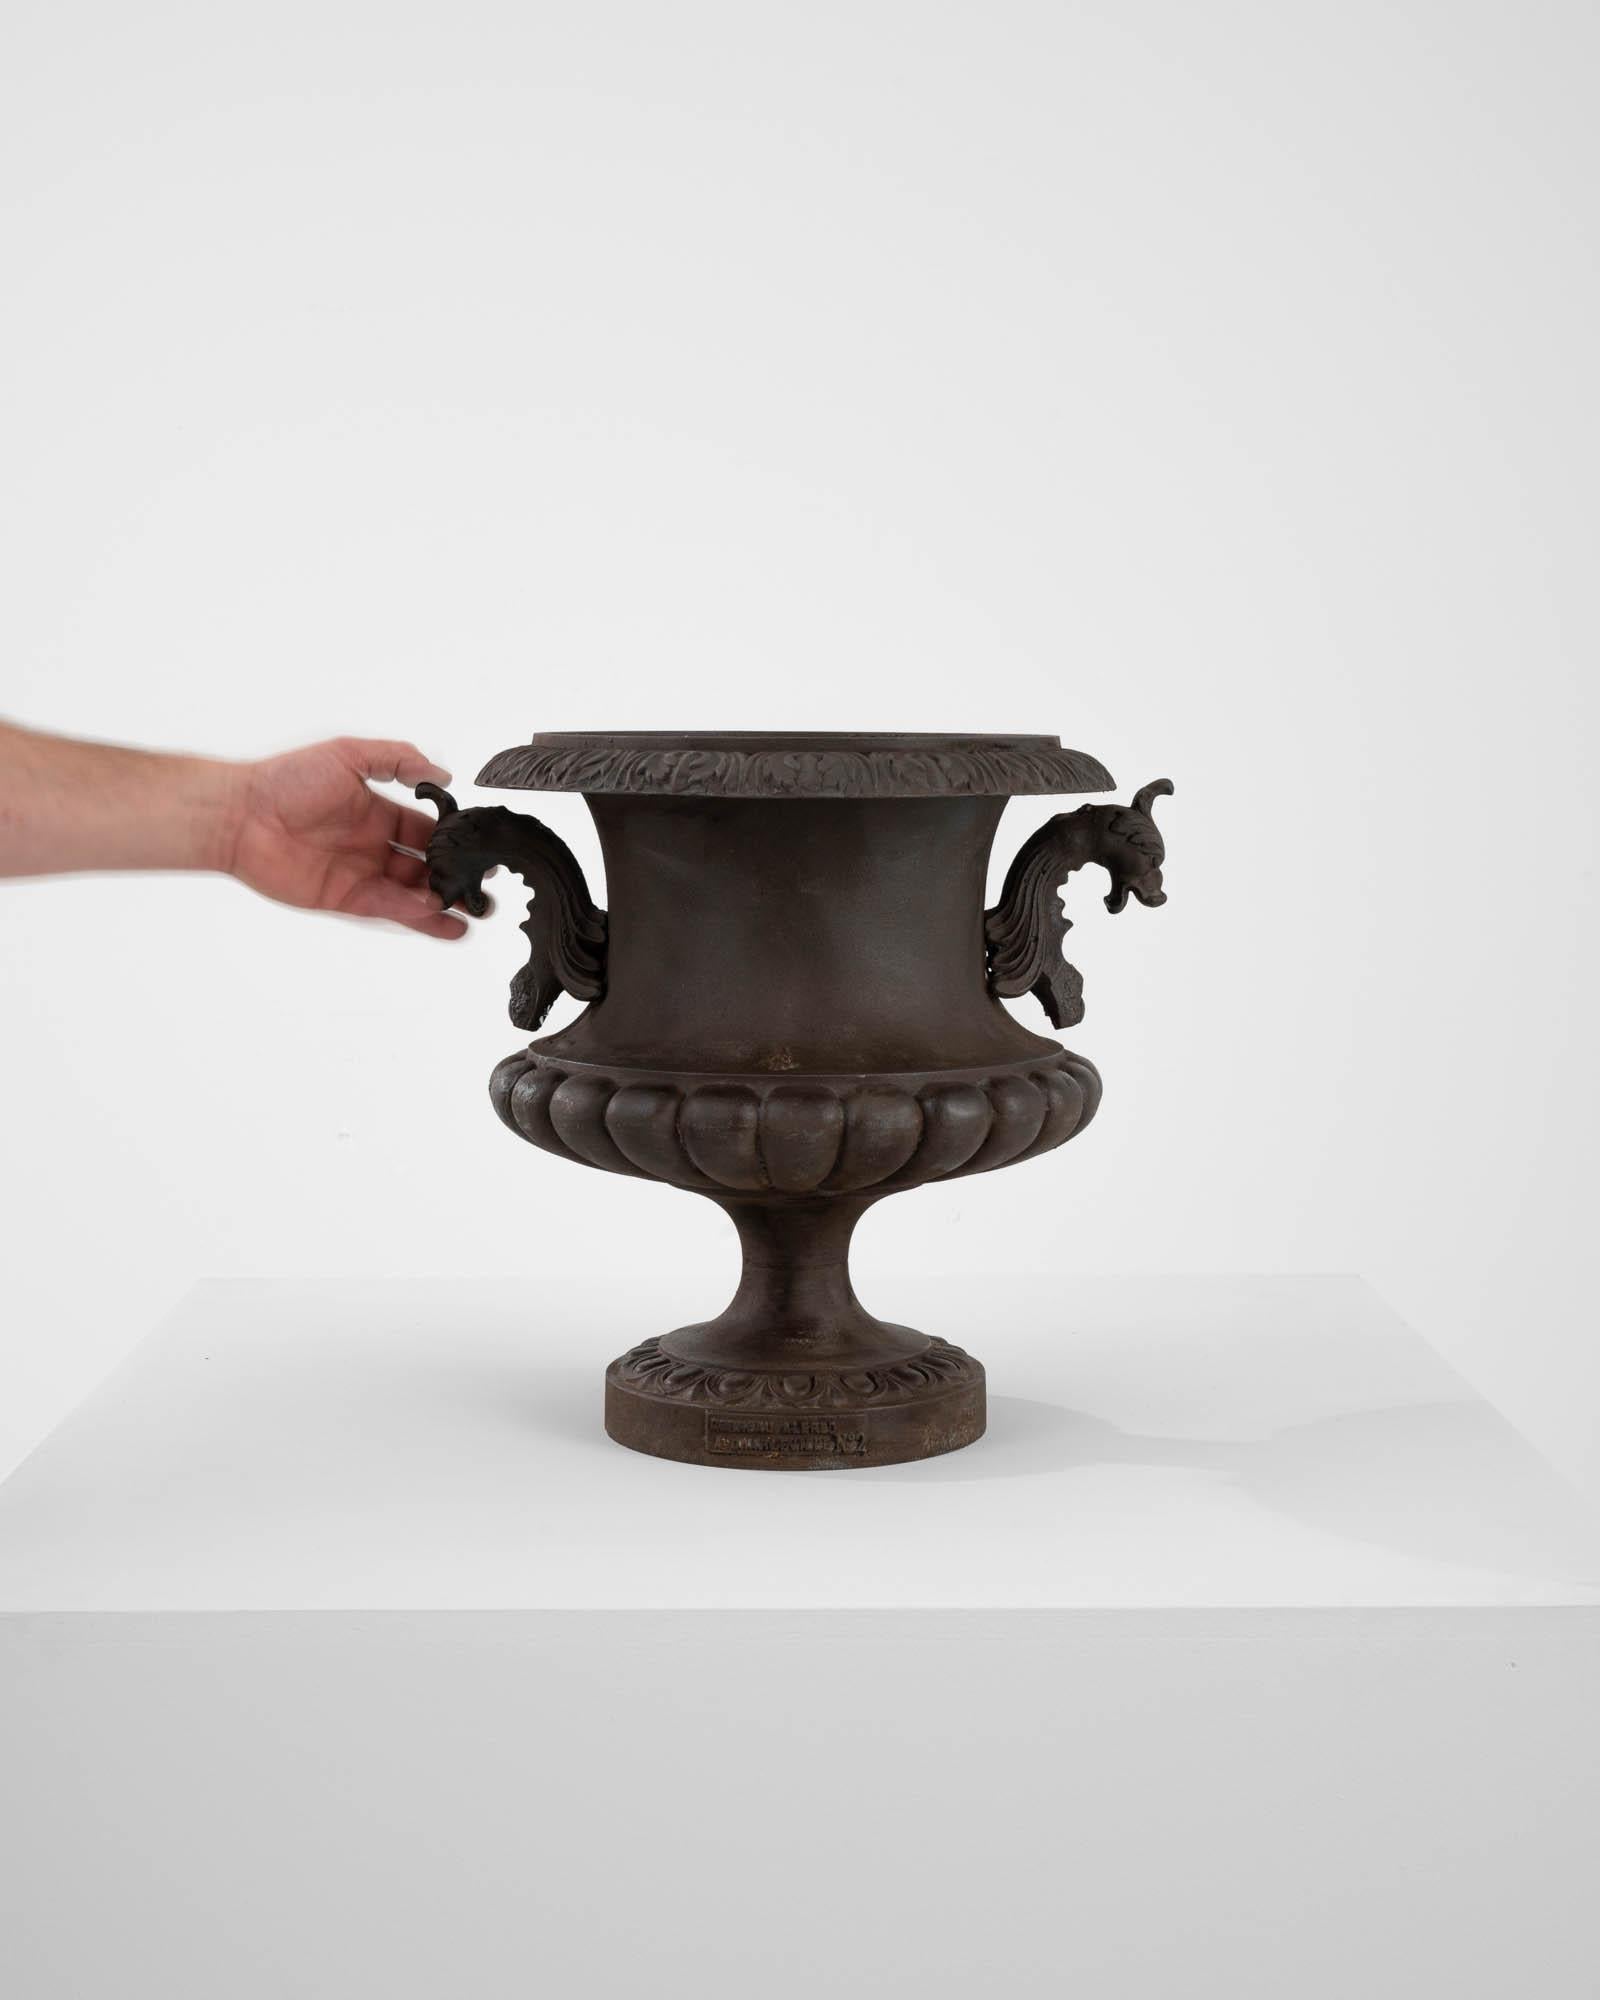 A cast iron planter from France, made in the 1870s. The campana shape resembled an upturned bell with a fluted cupola and broad lip, reminiscent of an opening blossom. It was made by Alfred Corneau, whose cast iron pieces were wildly popular as